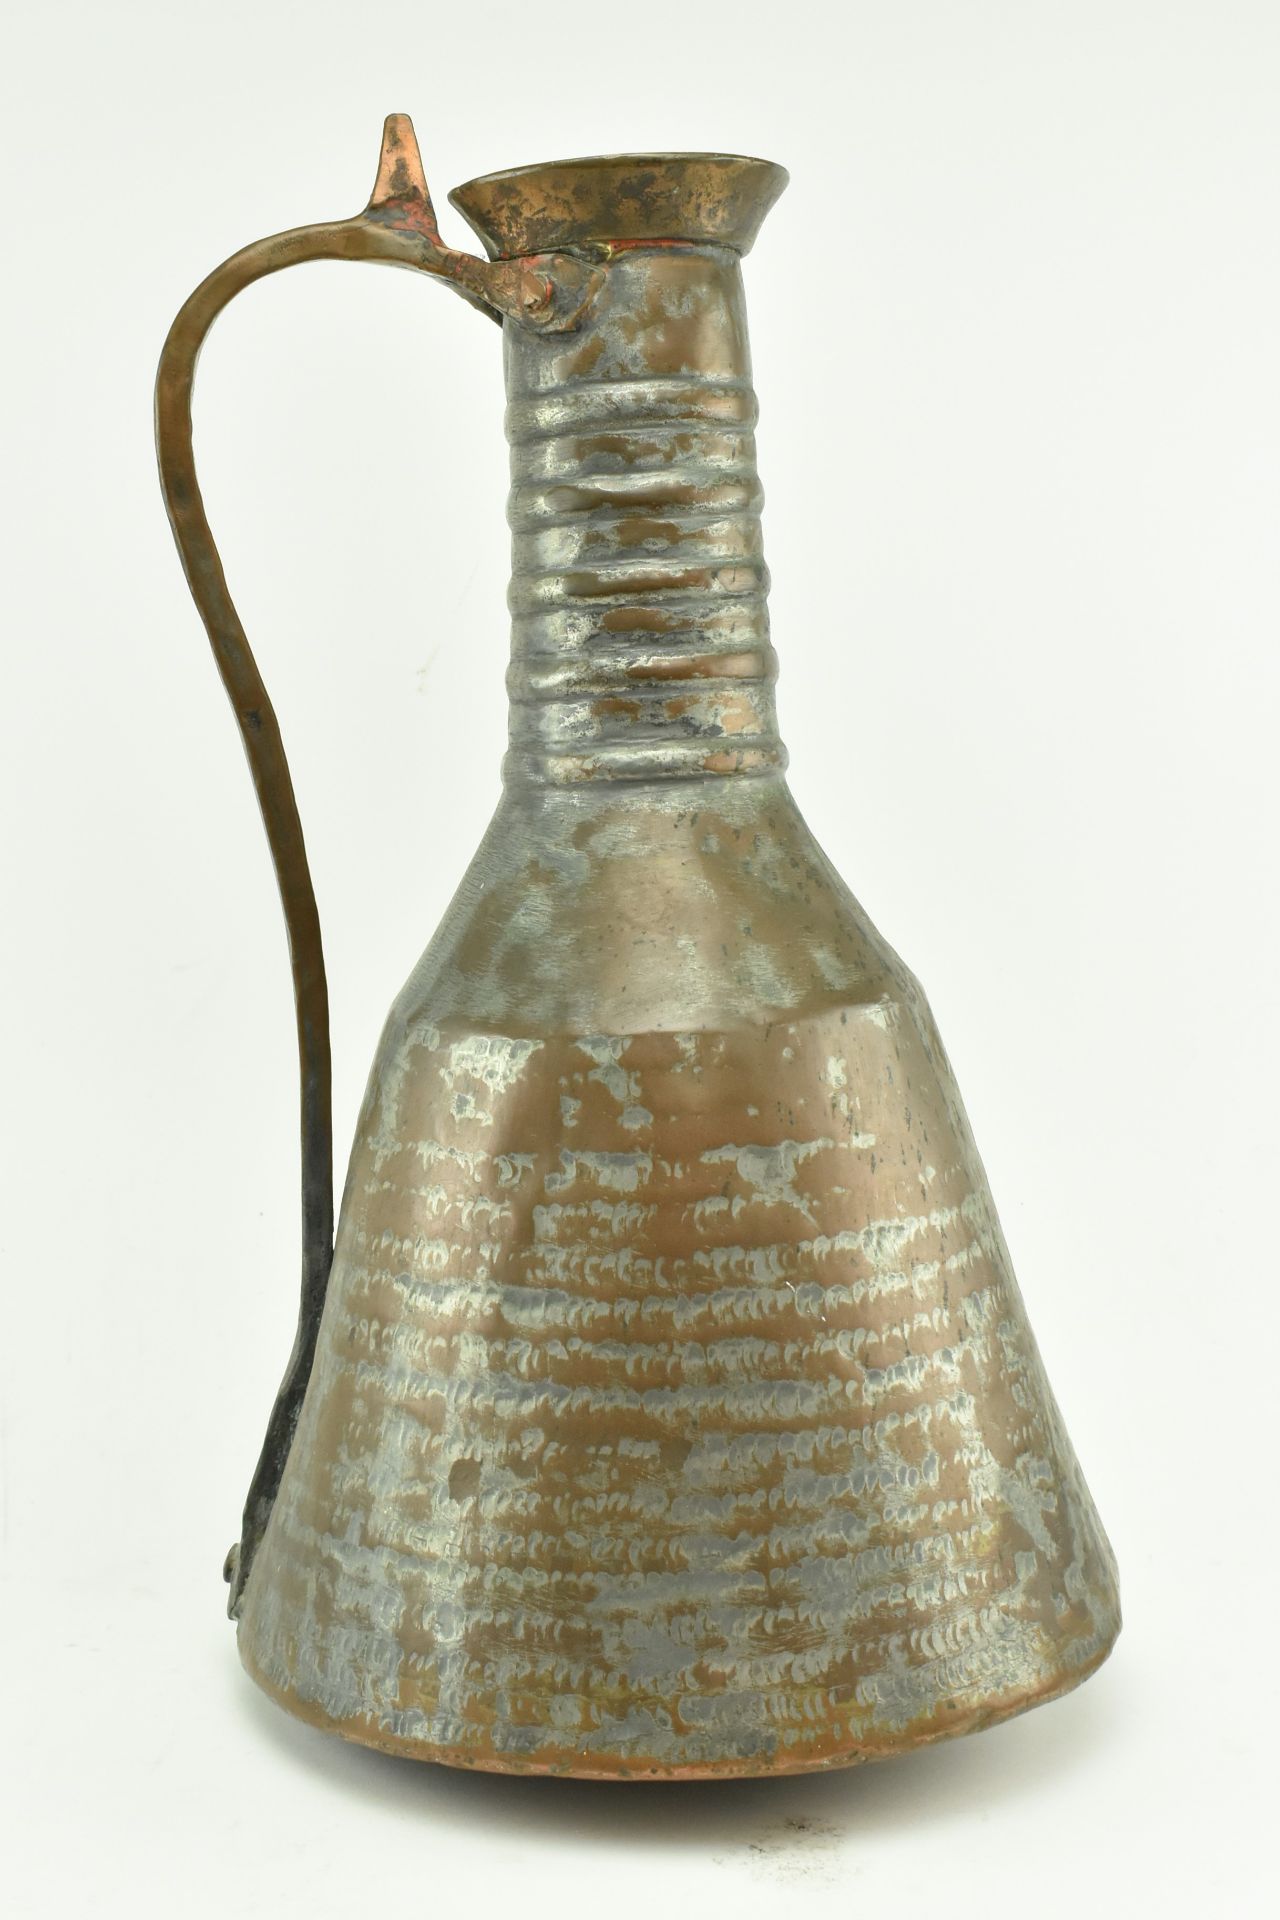 19TH CENTURY MIDDLE EASTERN OTTOMAN HAMMERED COPPER EWER - Image 3 of 7